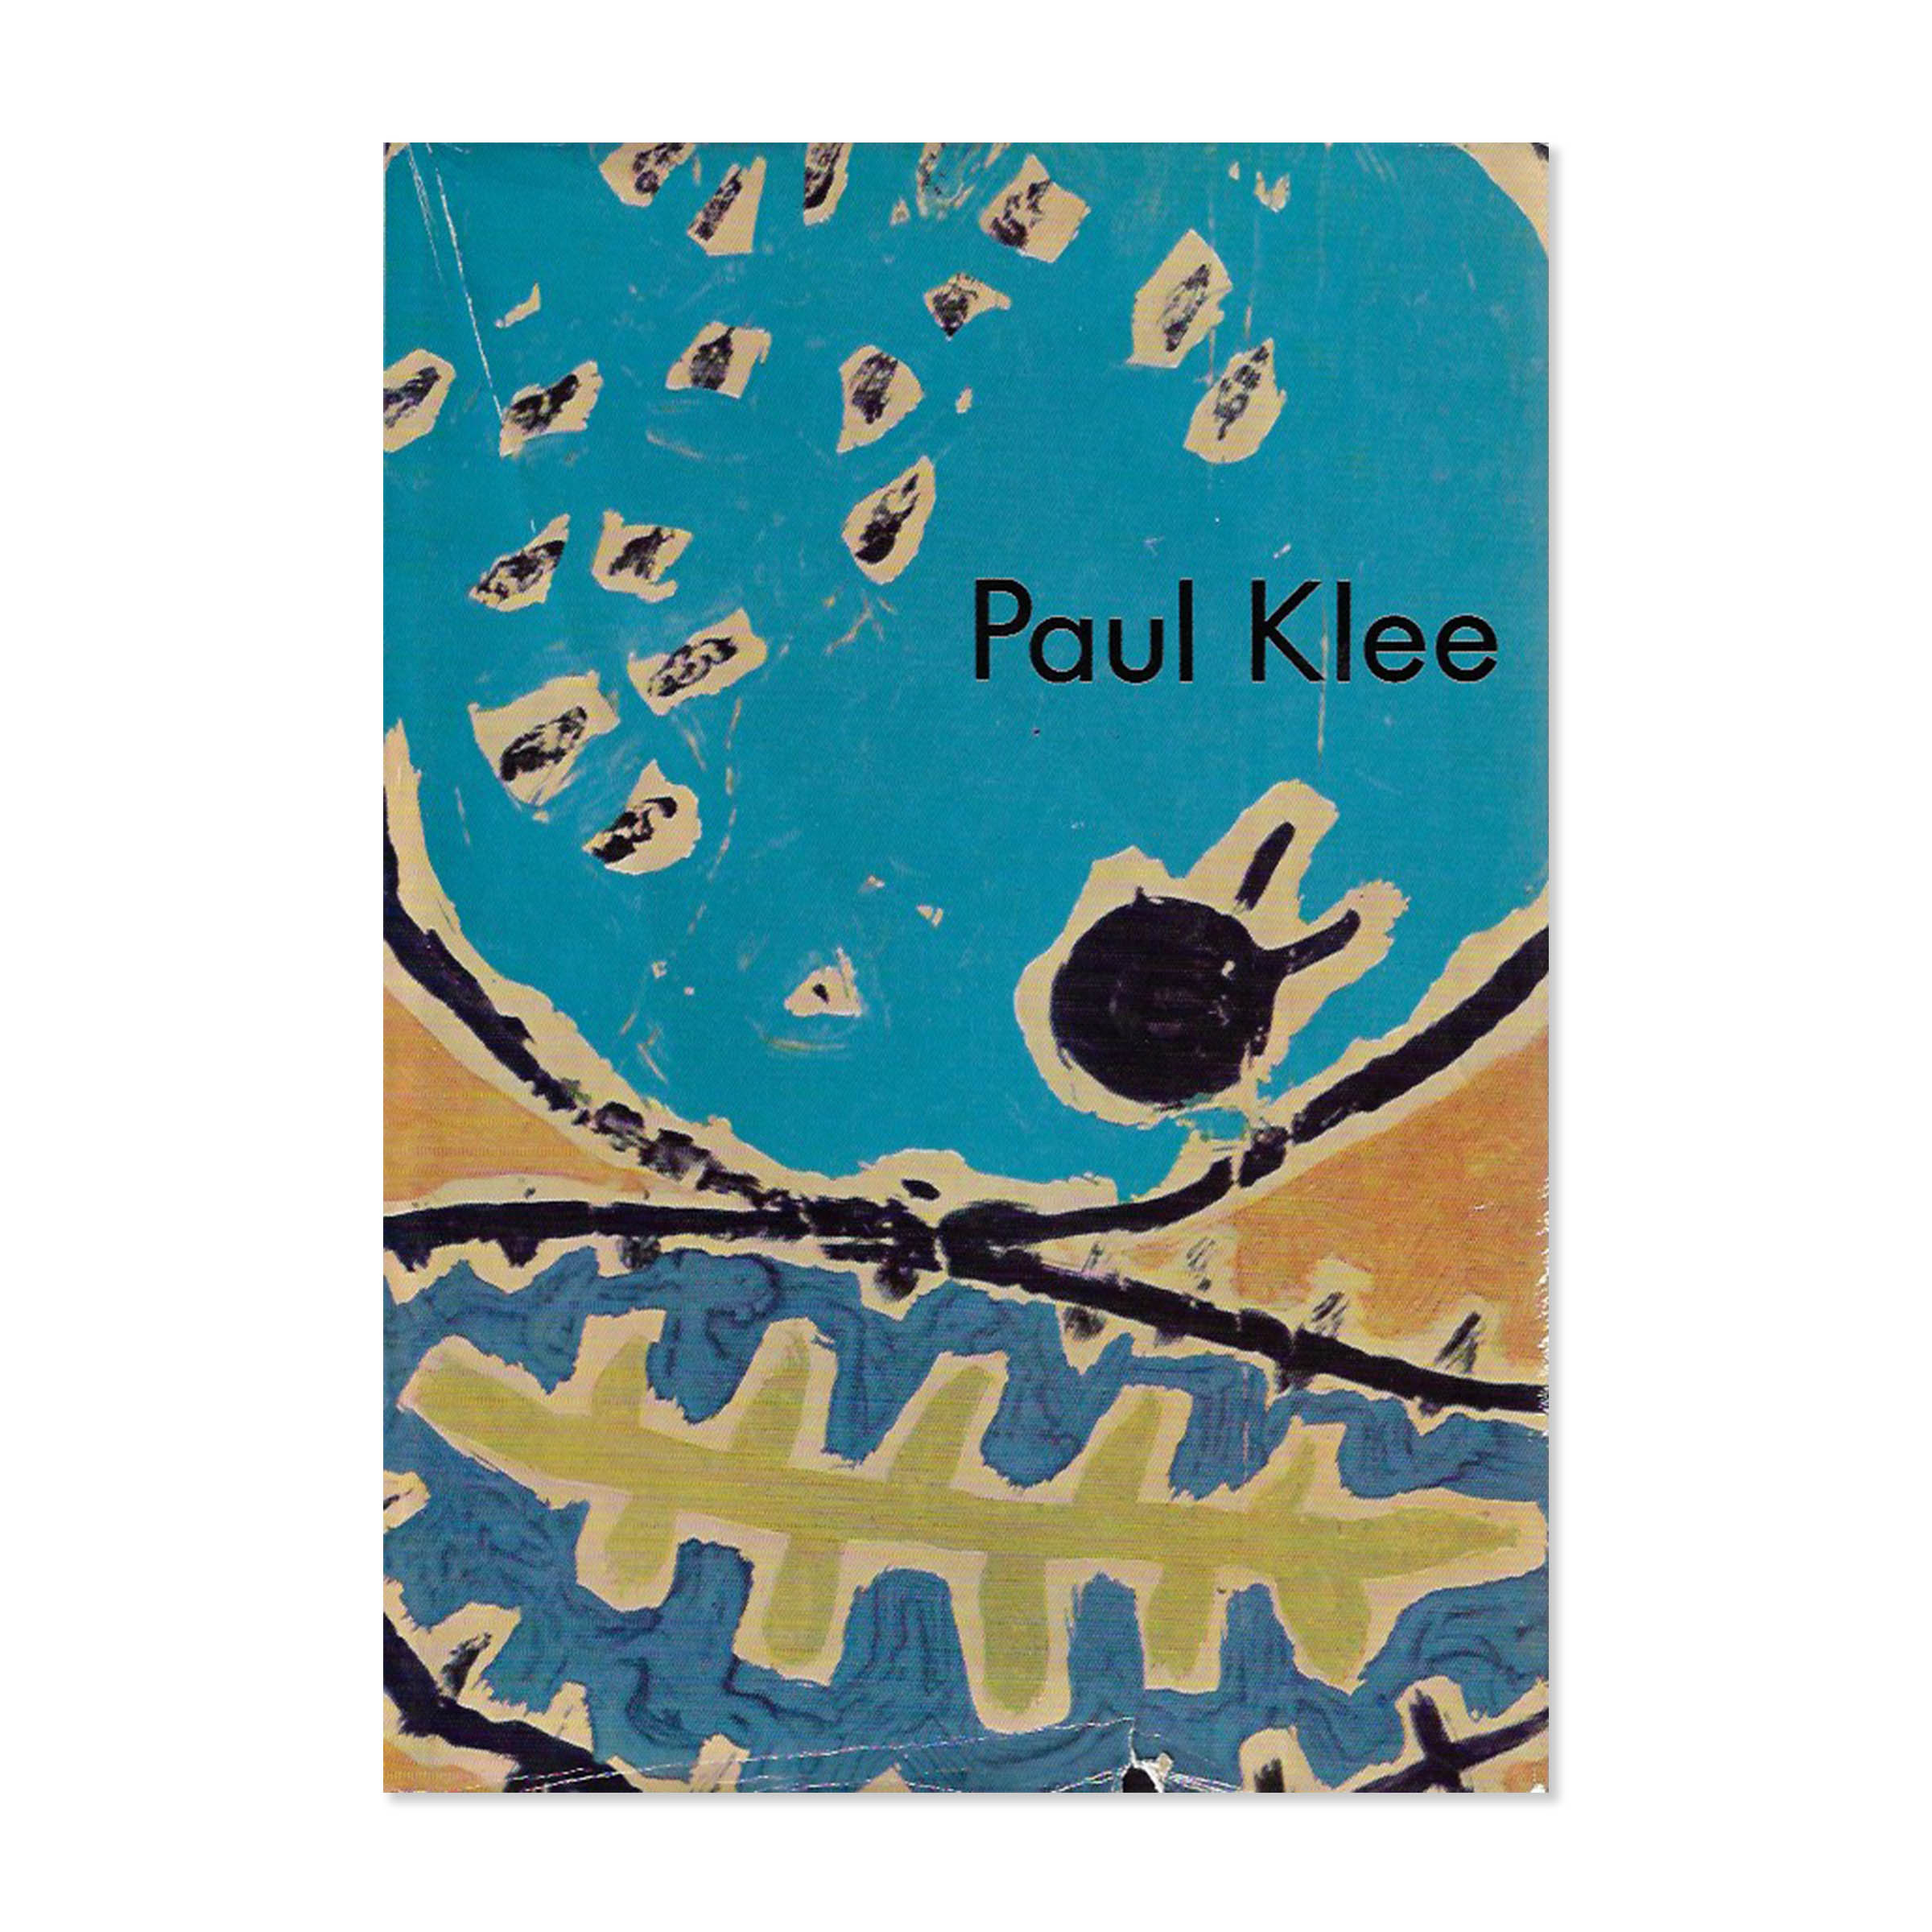 Klee by Grohmann. Cover sleeve view